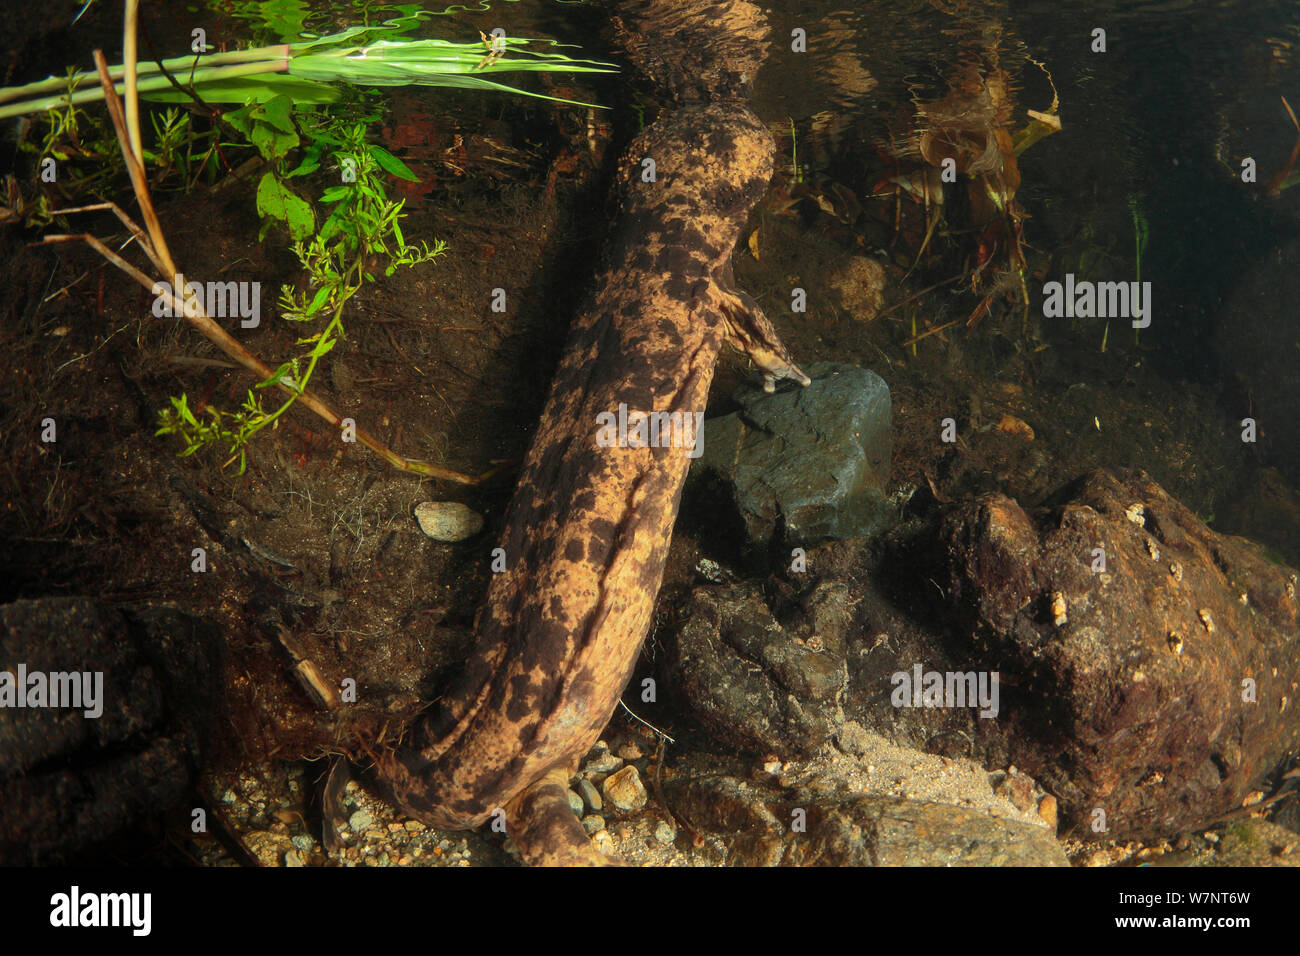 Japanese giant salamander (Andrias japonicus) coming up to breathe, Hino River, Tottori, Japan, August. Stock Photo